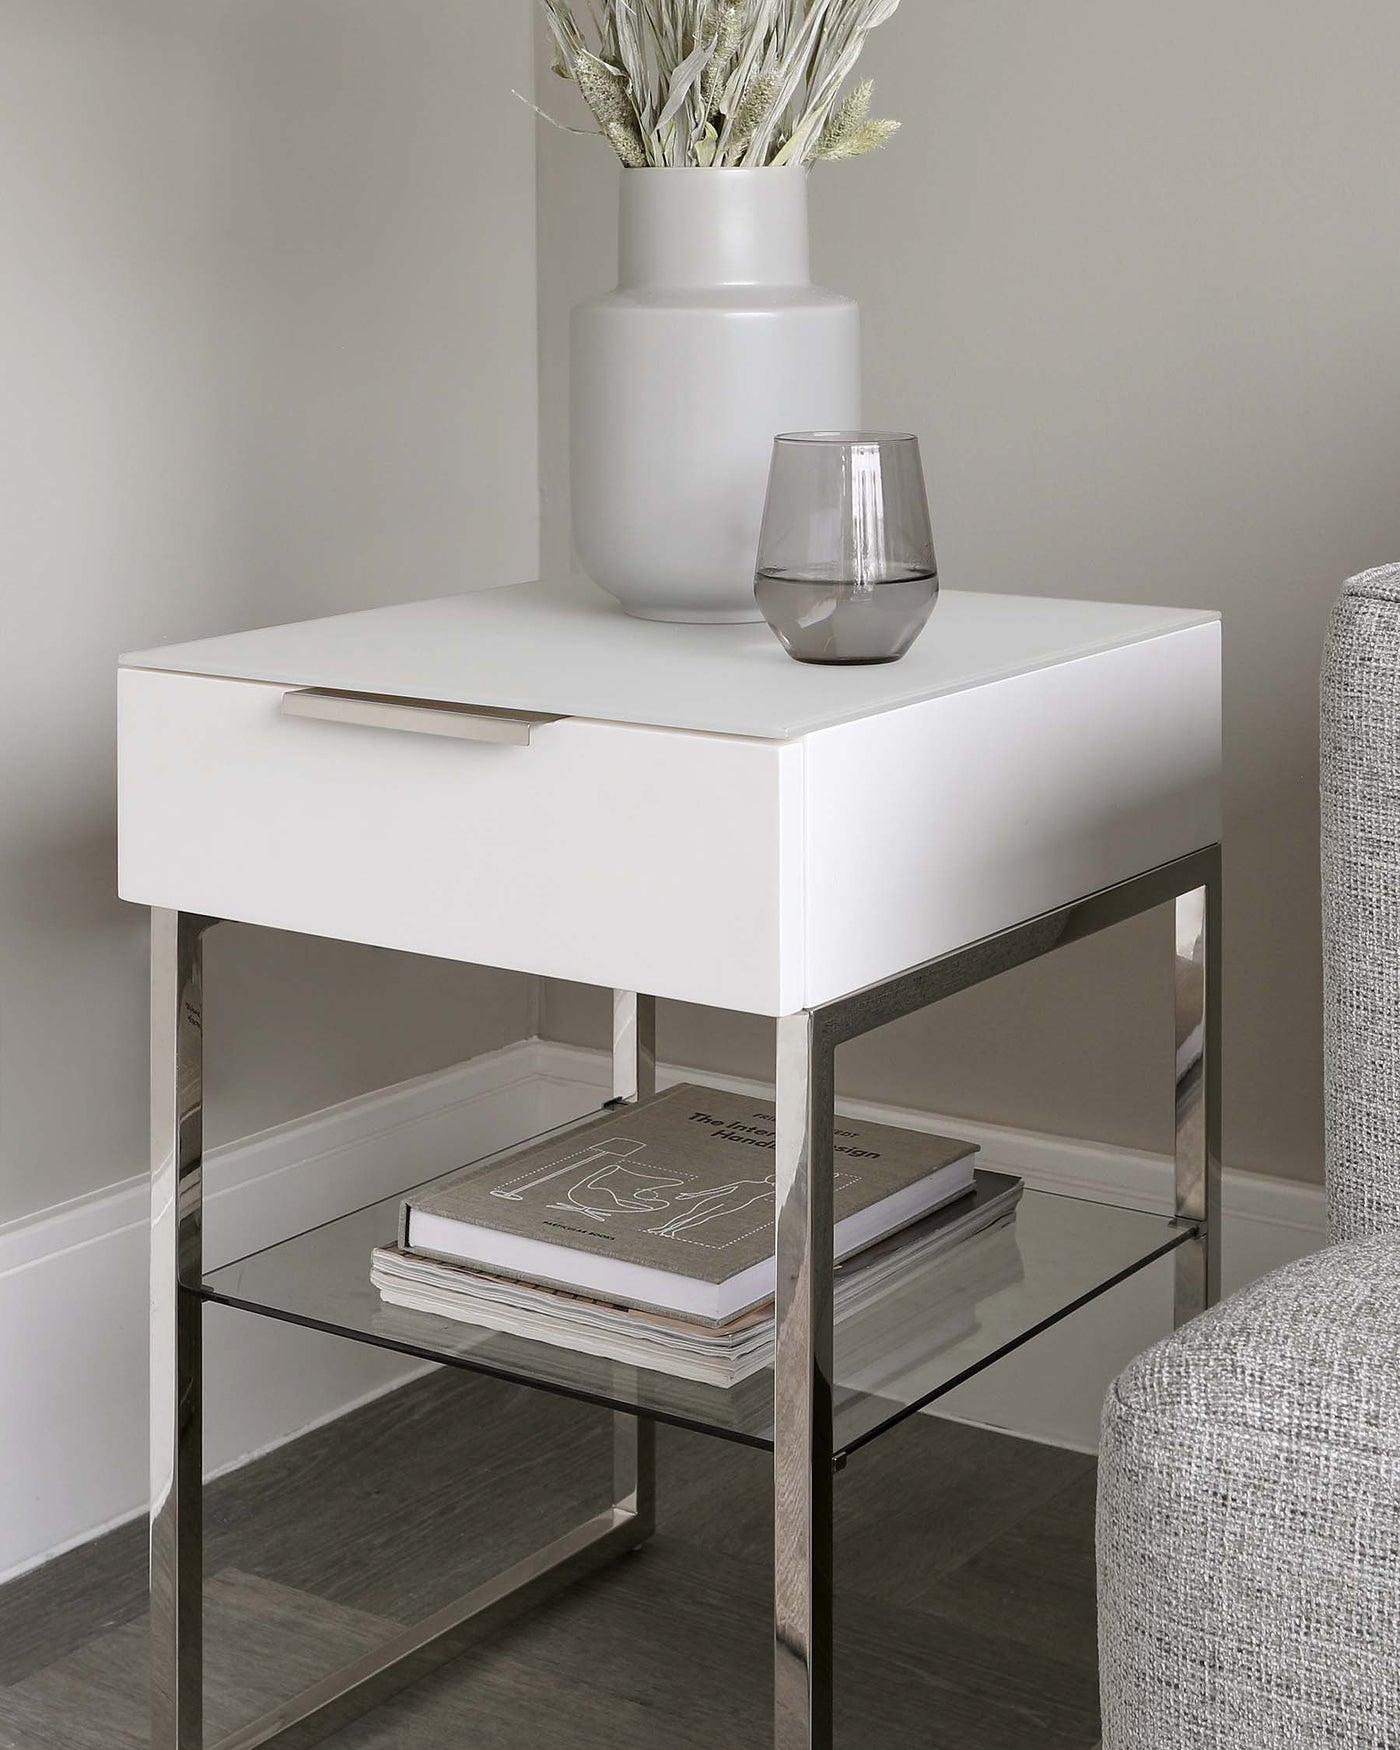 Modern bedside table with a white, square top drawer, sleek silver handle, and stainless steel frame. Features a lower glass shelf suitable for books or decorative items. Positioned next to an upholstered chair, with decorative vase and glass atop the table.